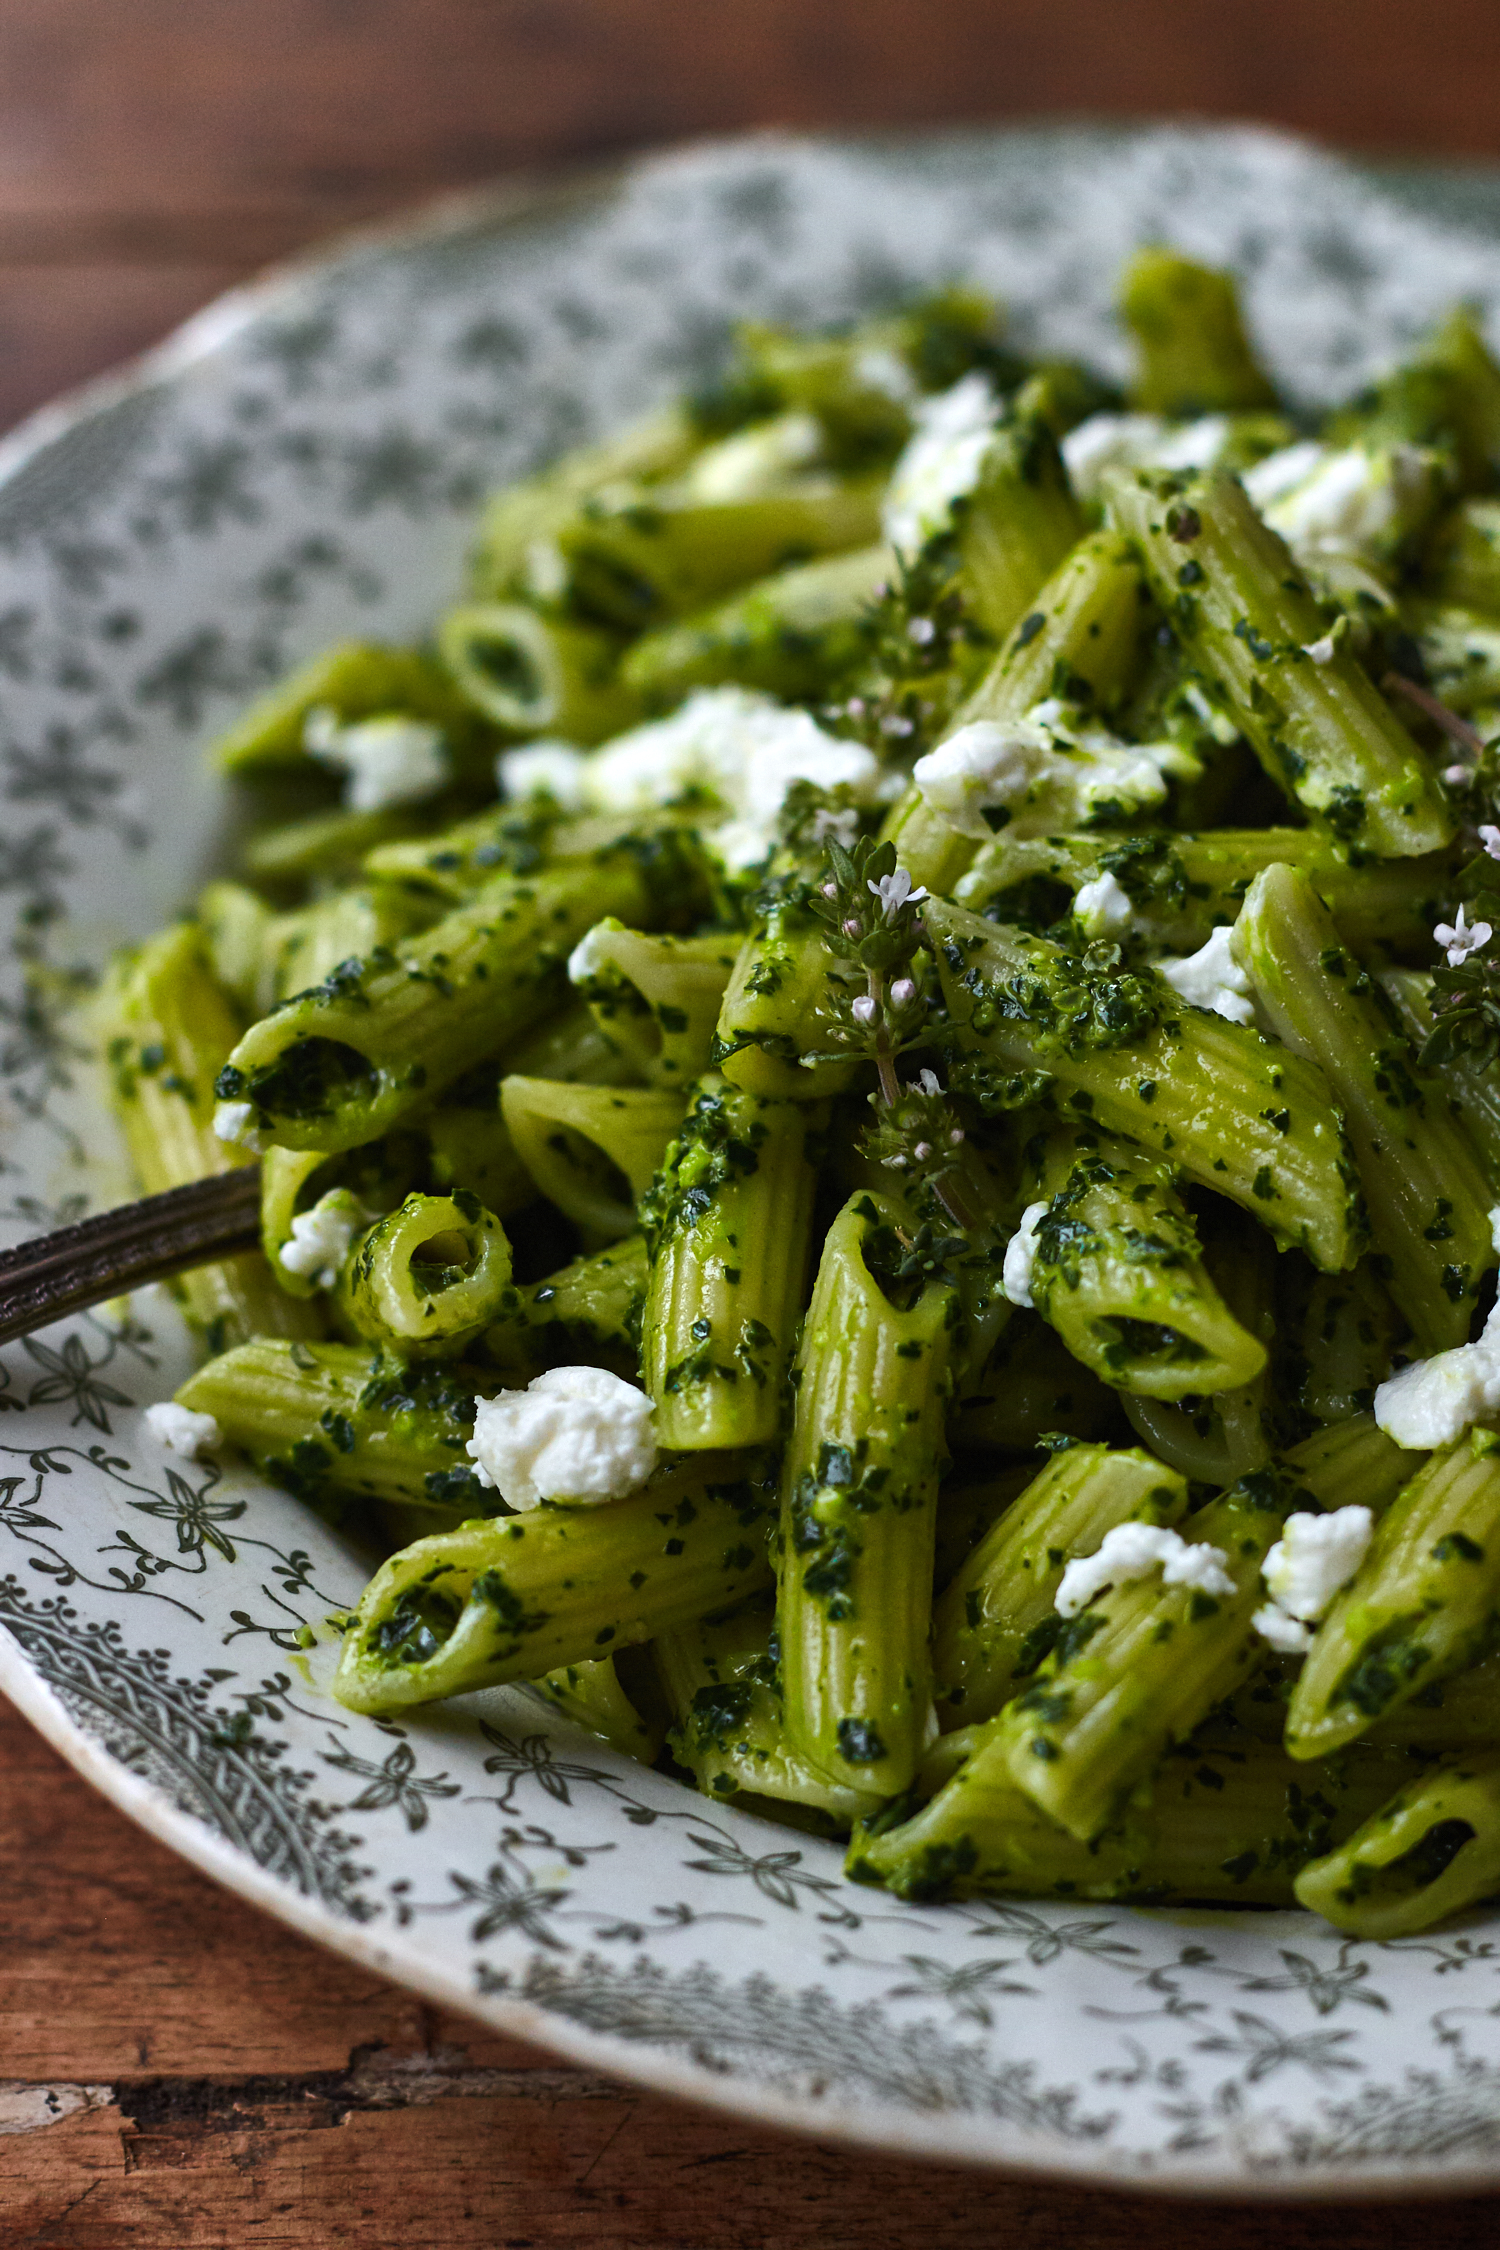 penne pasta made with winter greens like kale and goat cheese on a floral plate